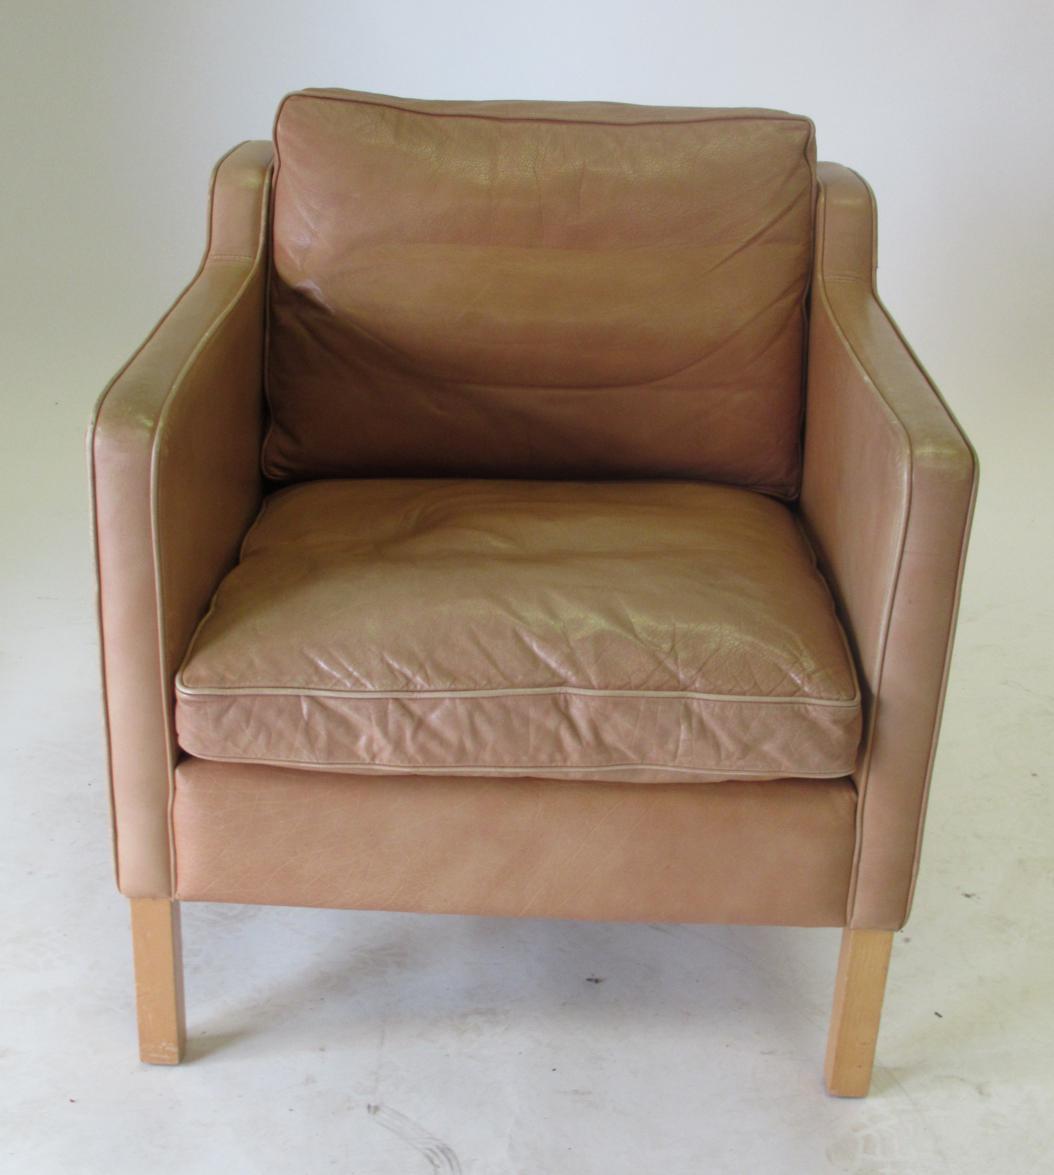 Lot 3657 - Stouby: A Danish Design Lounge Chair, in the manner of Borge Mogensen, covered in tan leather, with